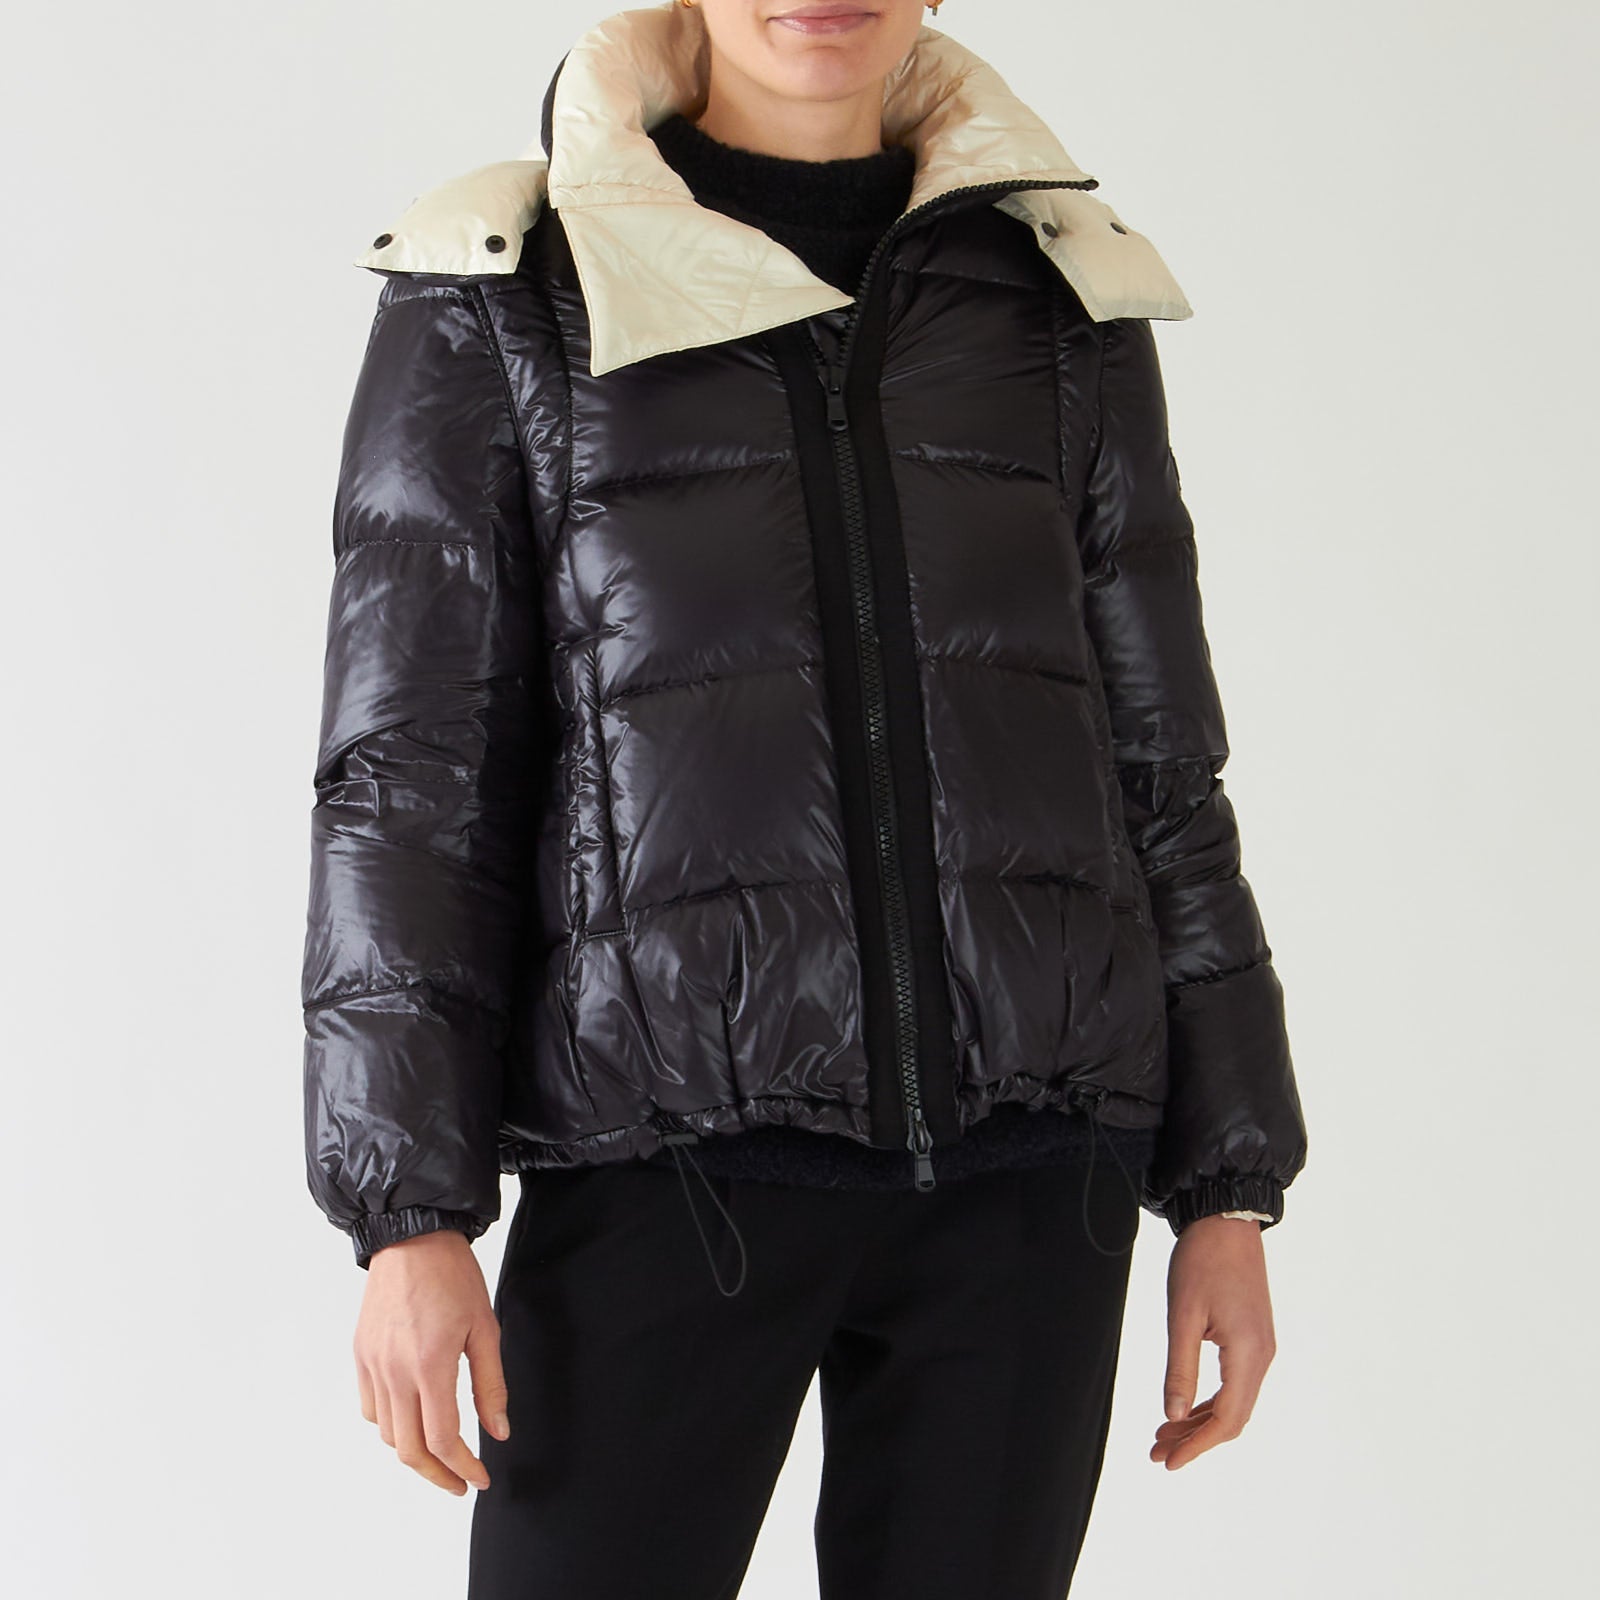 Black and Cream 2 In 1 Puffer Jacket